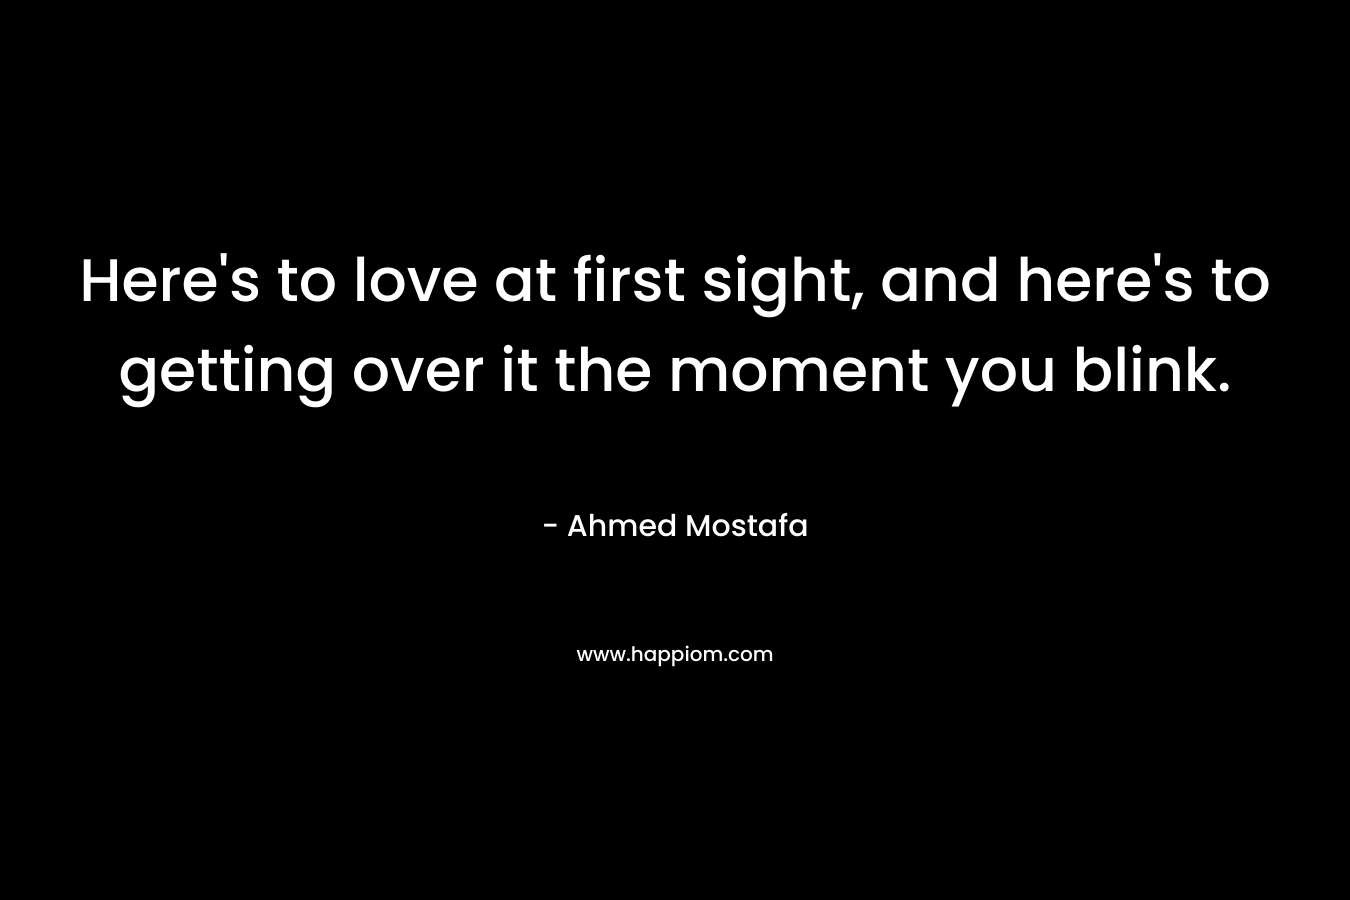 Here's to love at first sight, and here's to getting over it the moment you blink.